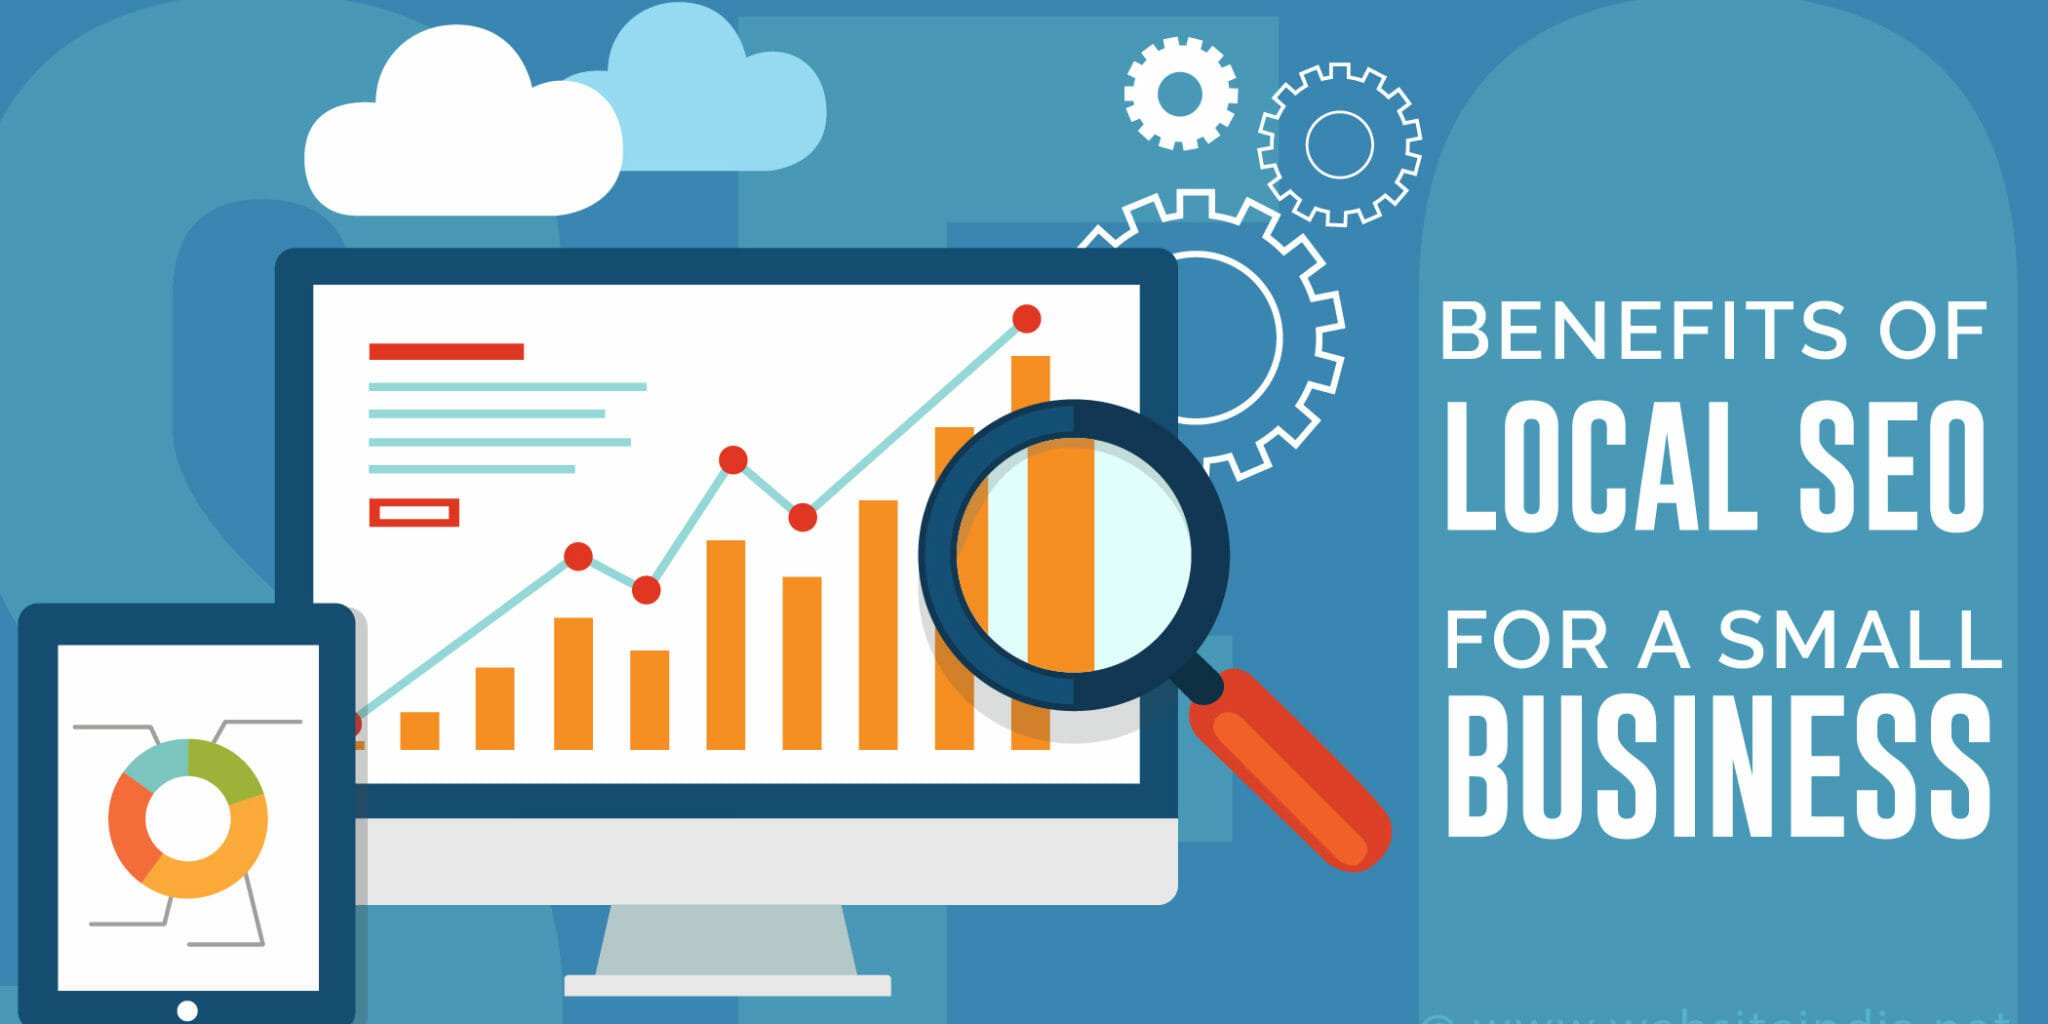 local seo services, seo services for small business